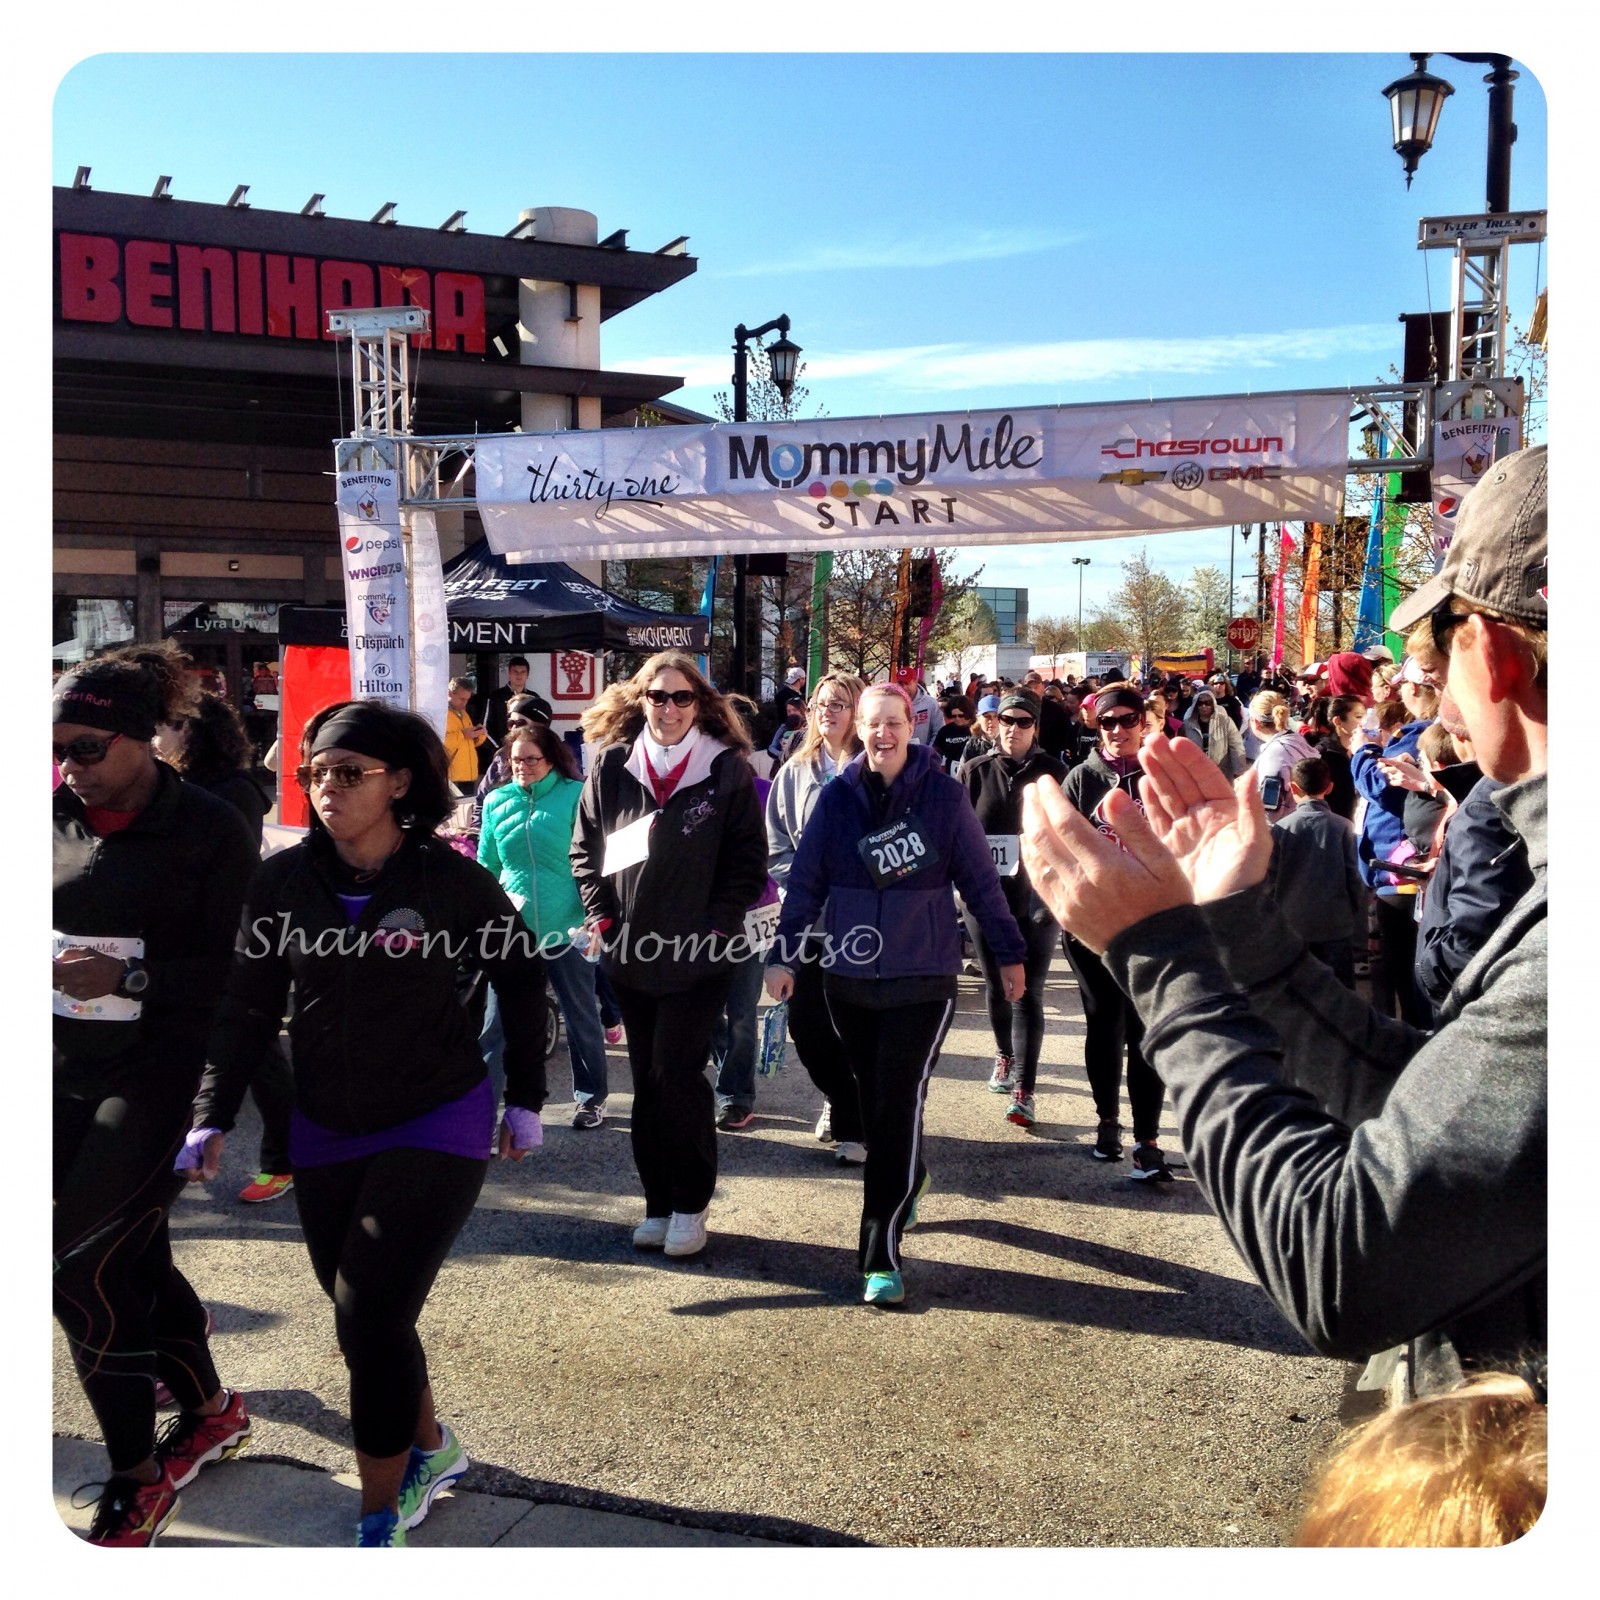 A Weekend of 5Ks Races and the Mommy Mile|Sharon the Moments